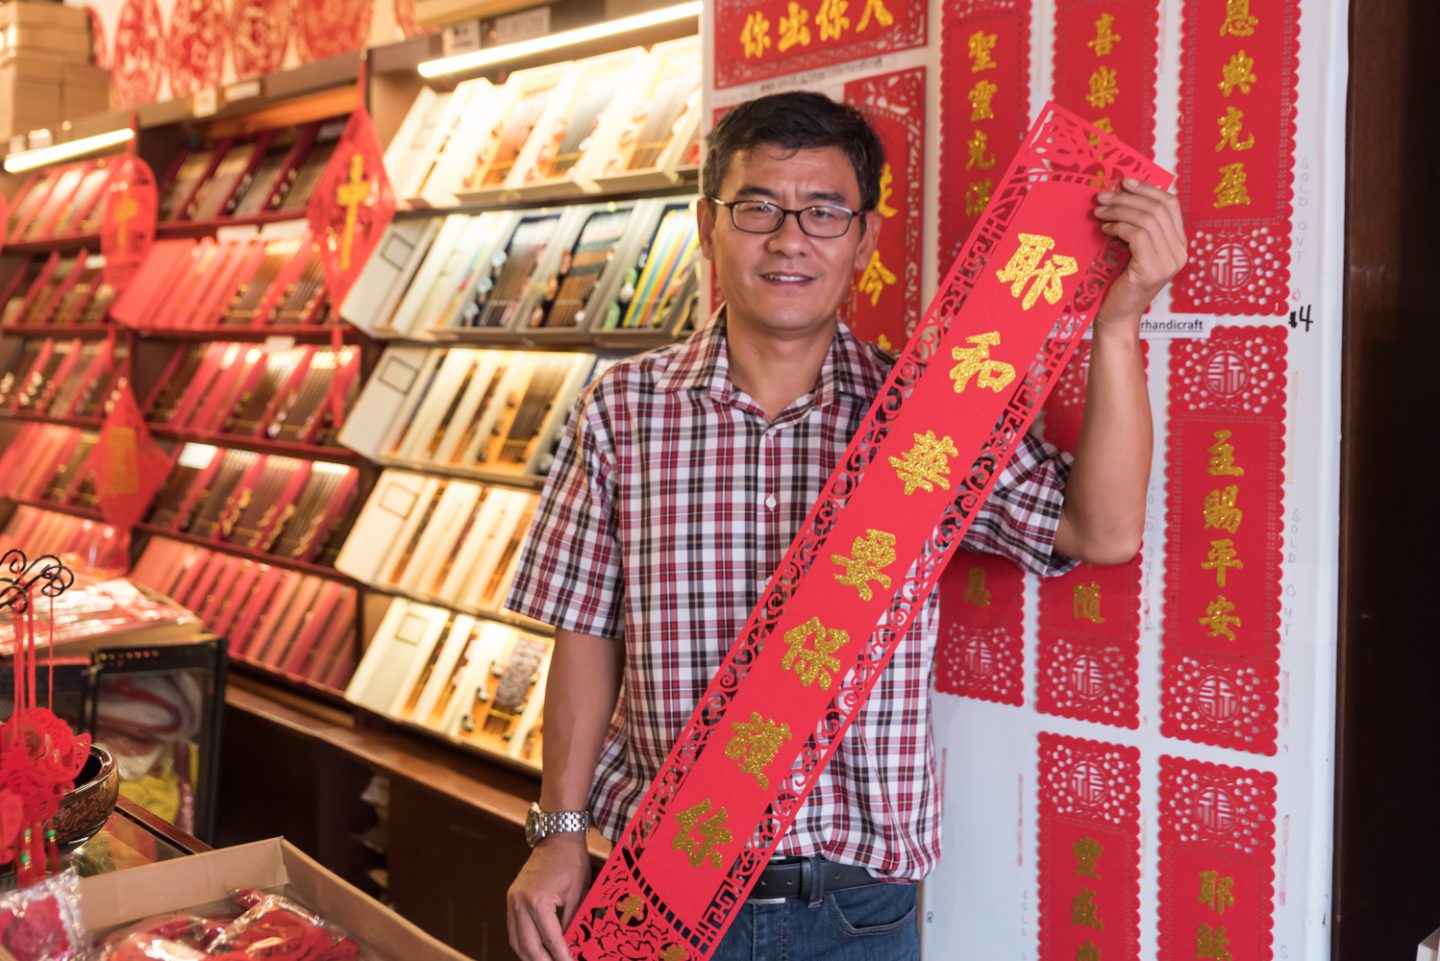 Moses Zhao in his shop at 24 Sago Street. All photos by Glen Goh.